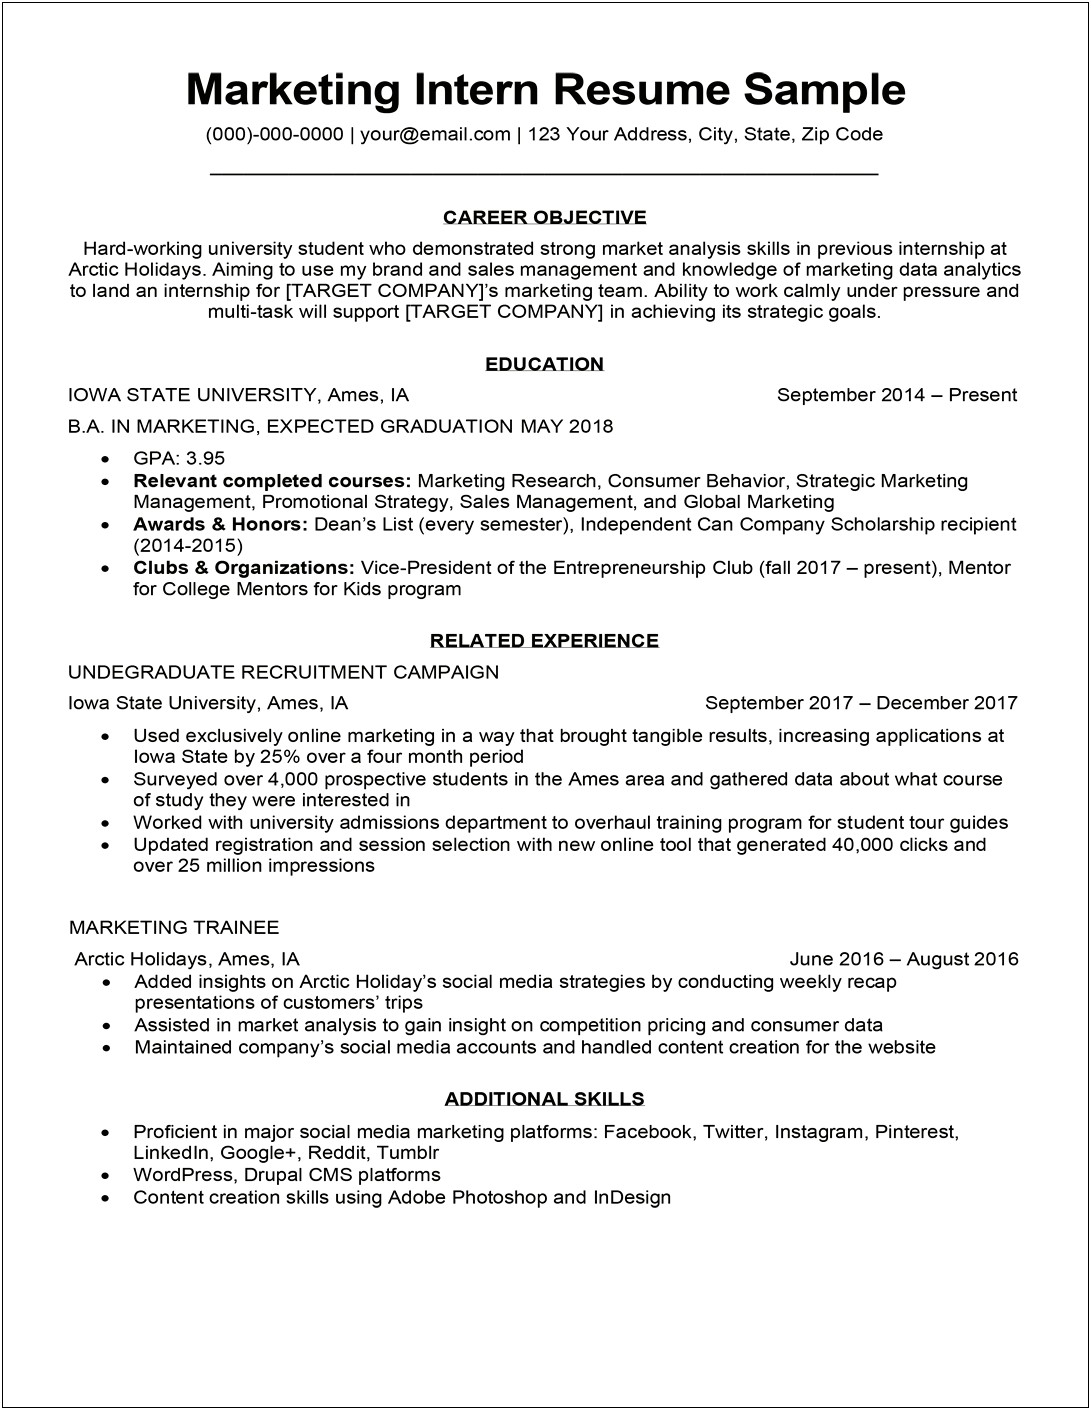 Resume For College Student With Limited Work Experience